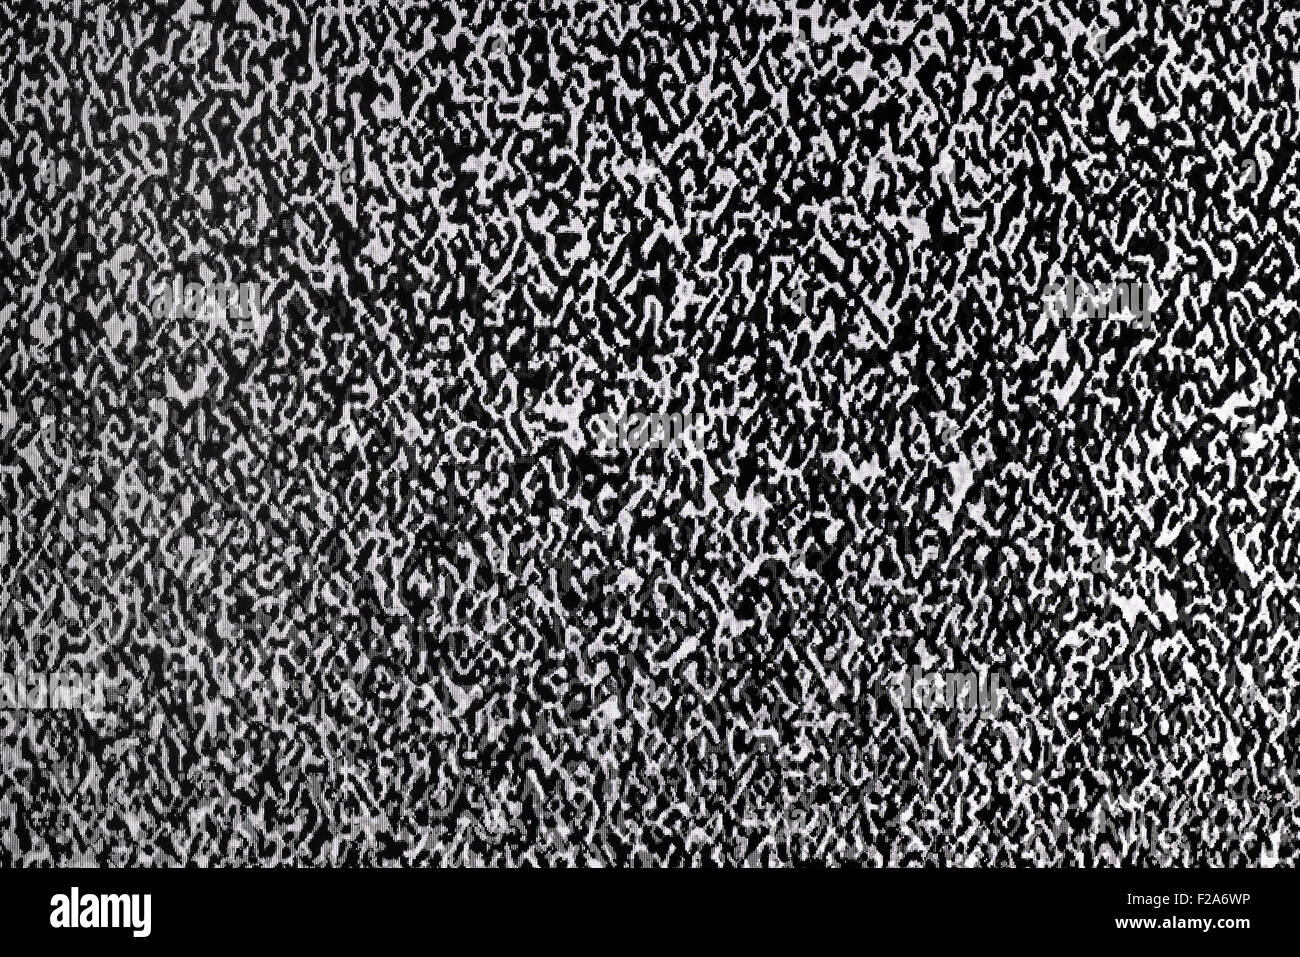 Television static noise, broadcast fail, crt kinescope TV noise and snow Stock Photo